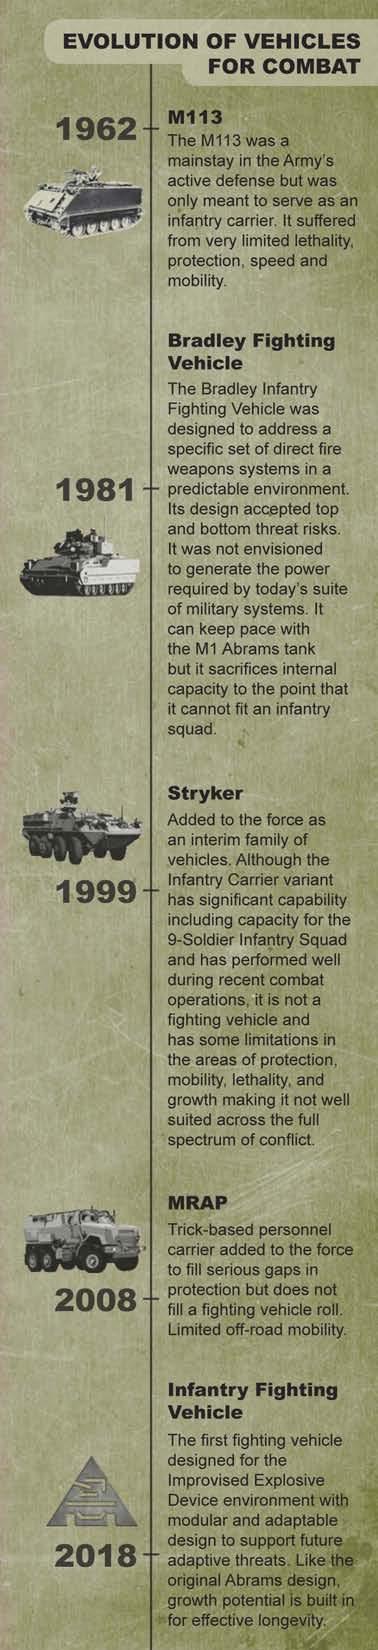 EVOLUTION OF VEHICLES FOR COMBAT 1962 1981 M113 The M113 was a mainstay in the Army's active defense but was only meant to serve as an infantry carrier.